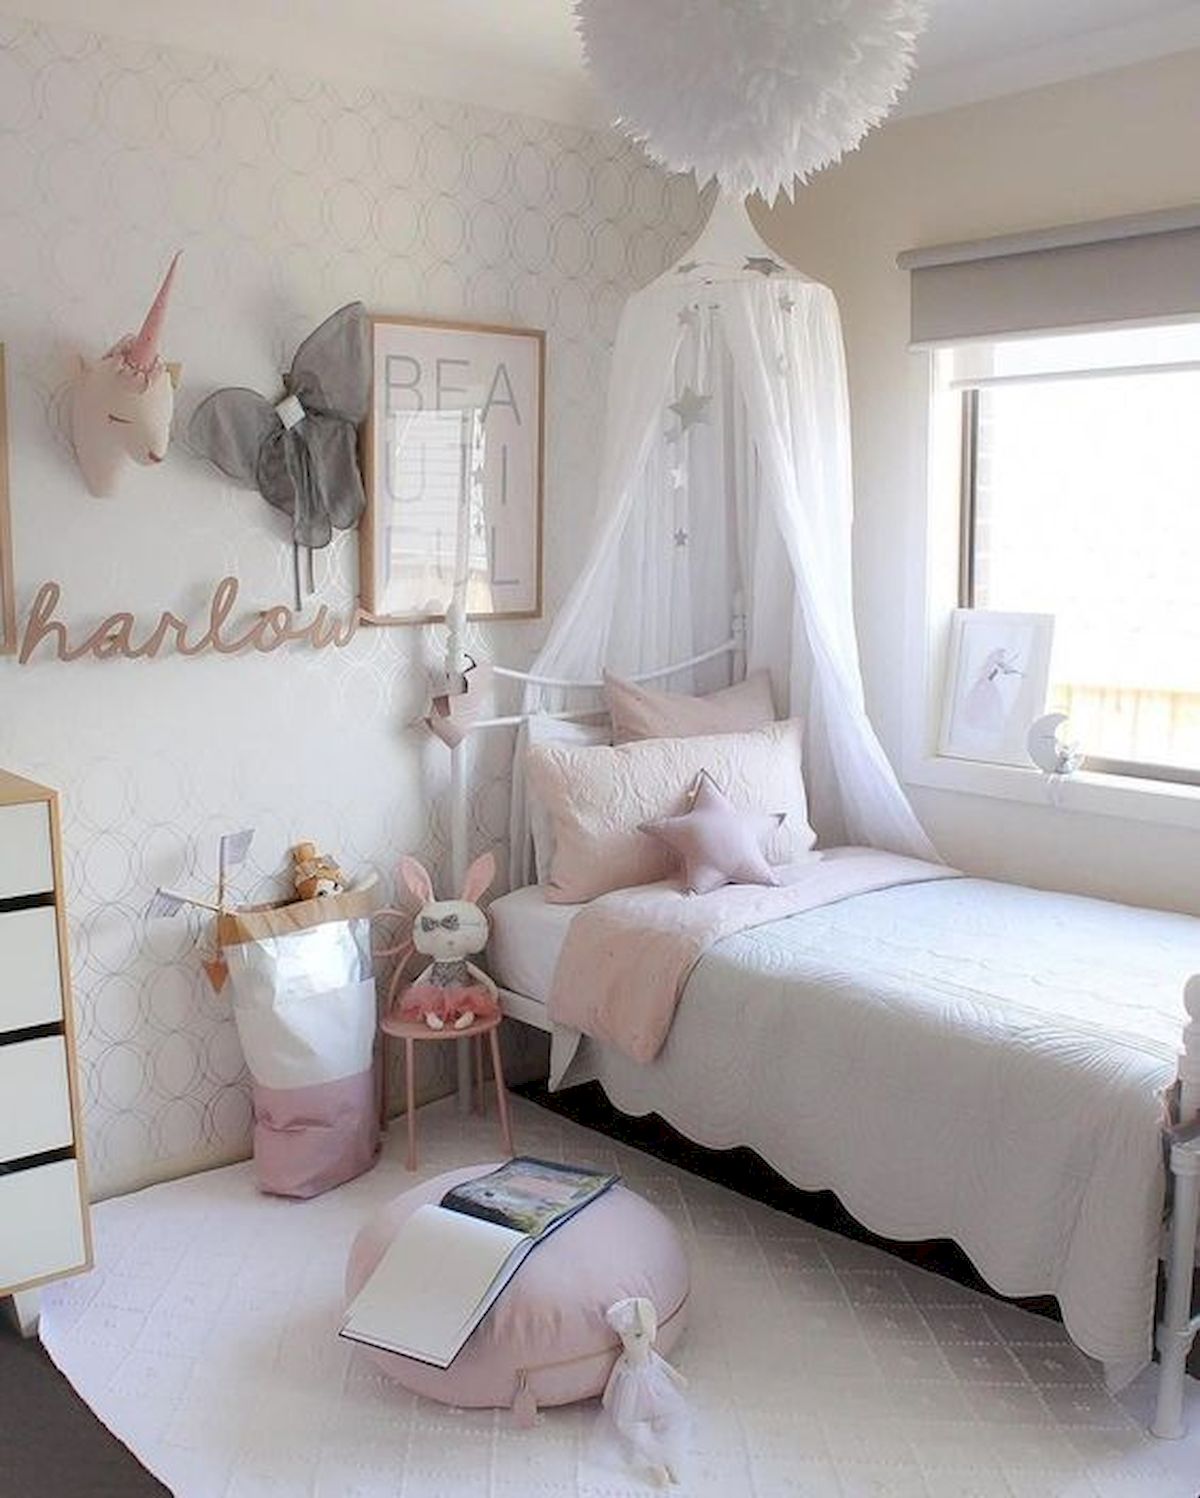 40 Cute Small Bedroom Design and Decor Ideas for Teenage Girl (22)